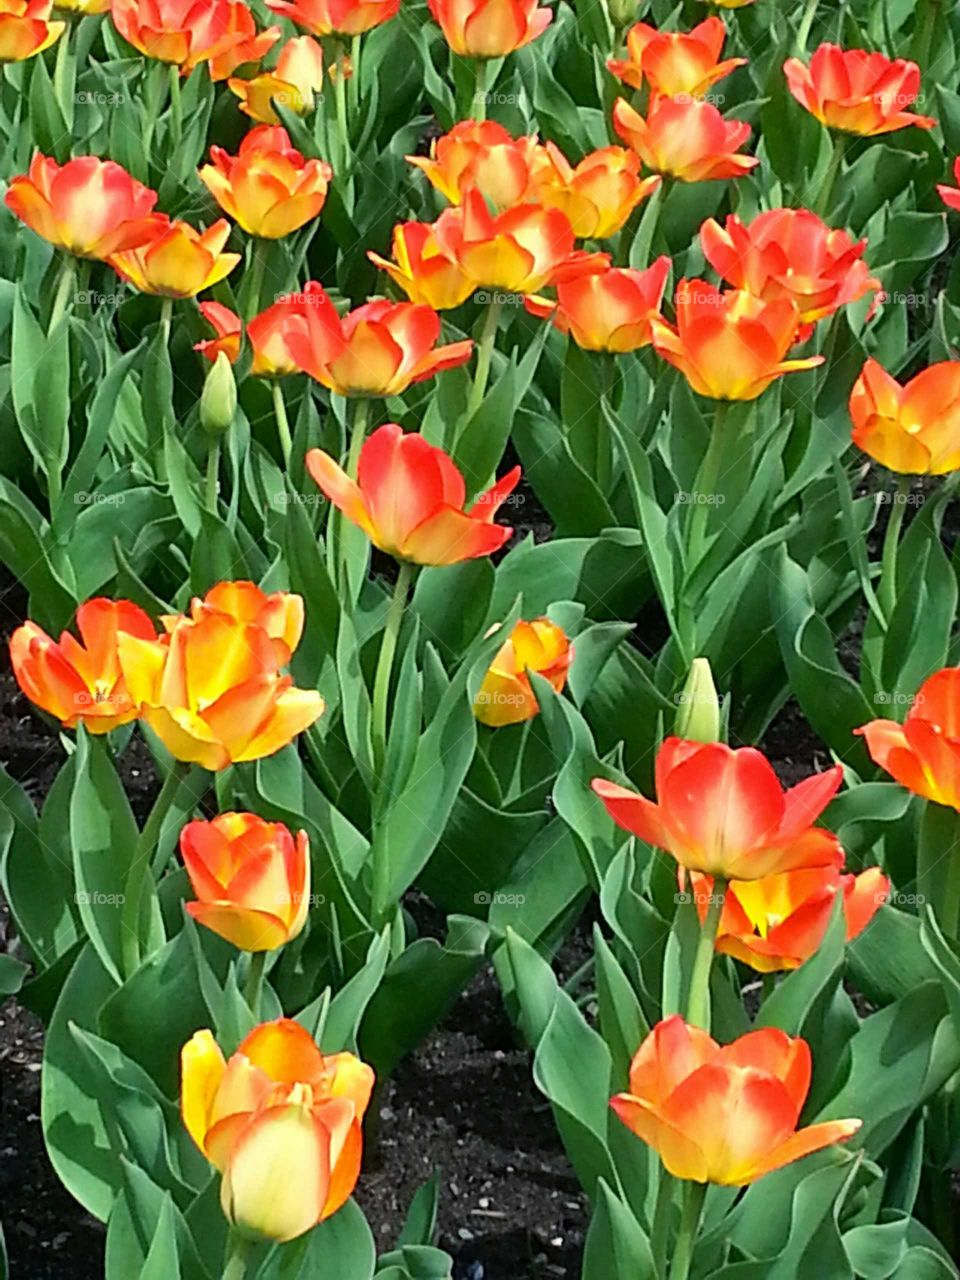 Several red and yellow tulips